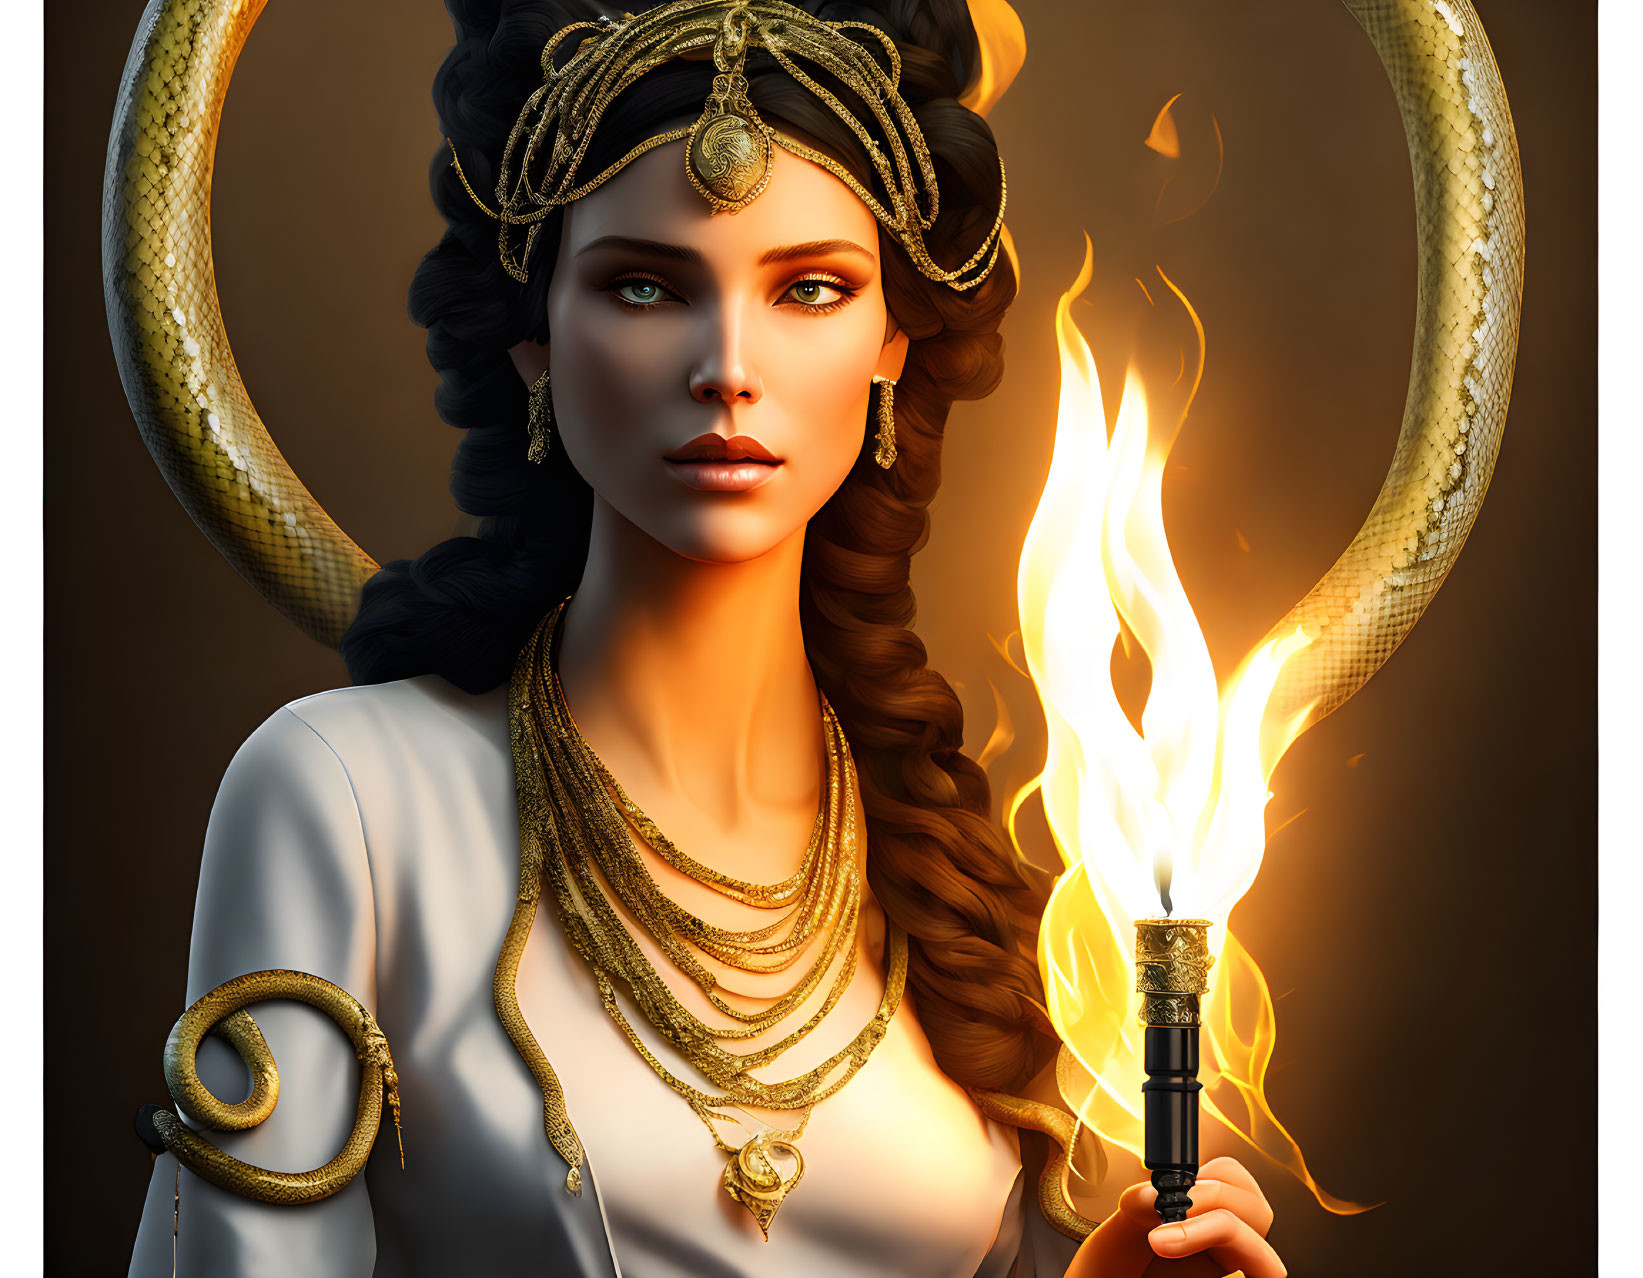 Goddess Hecate with snake wrapped around her neck